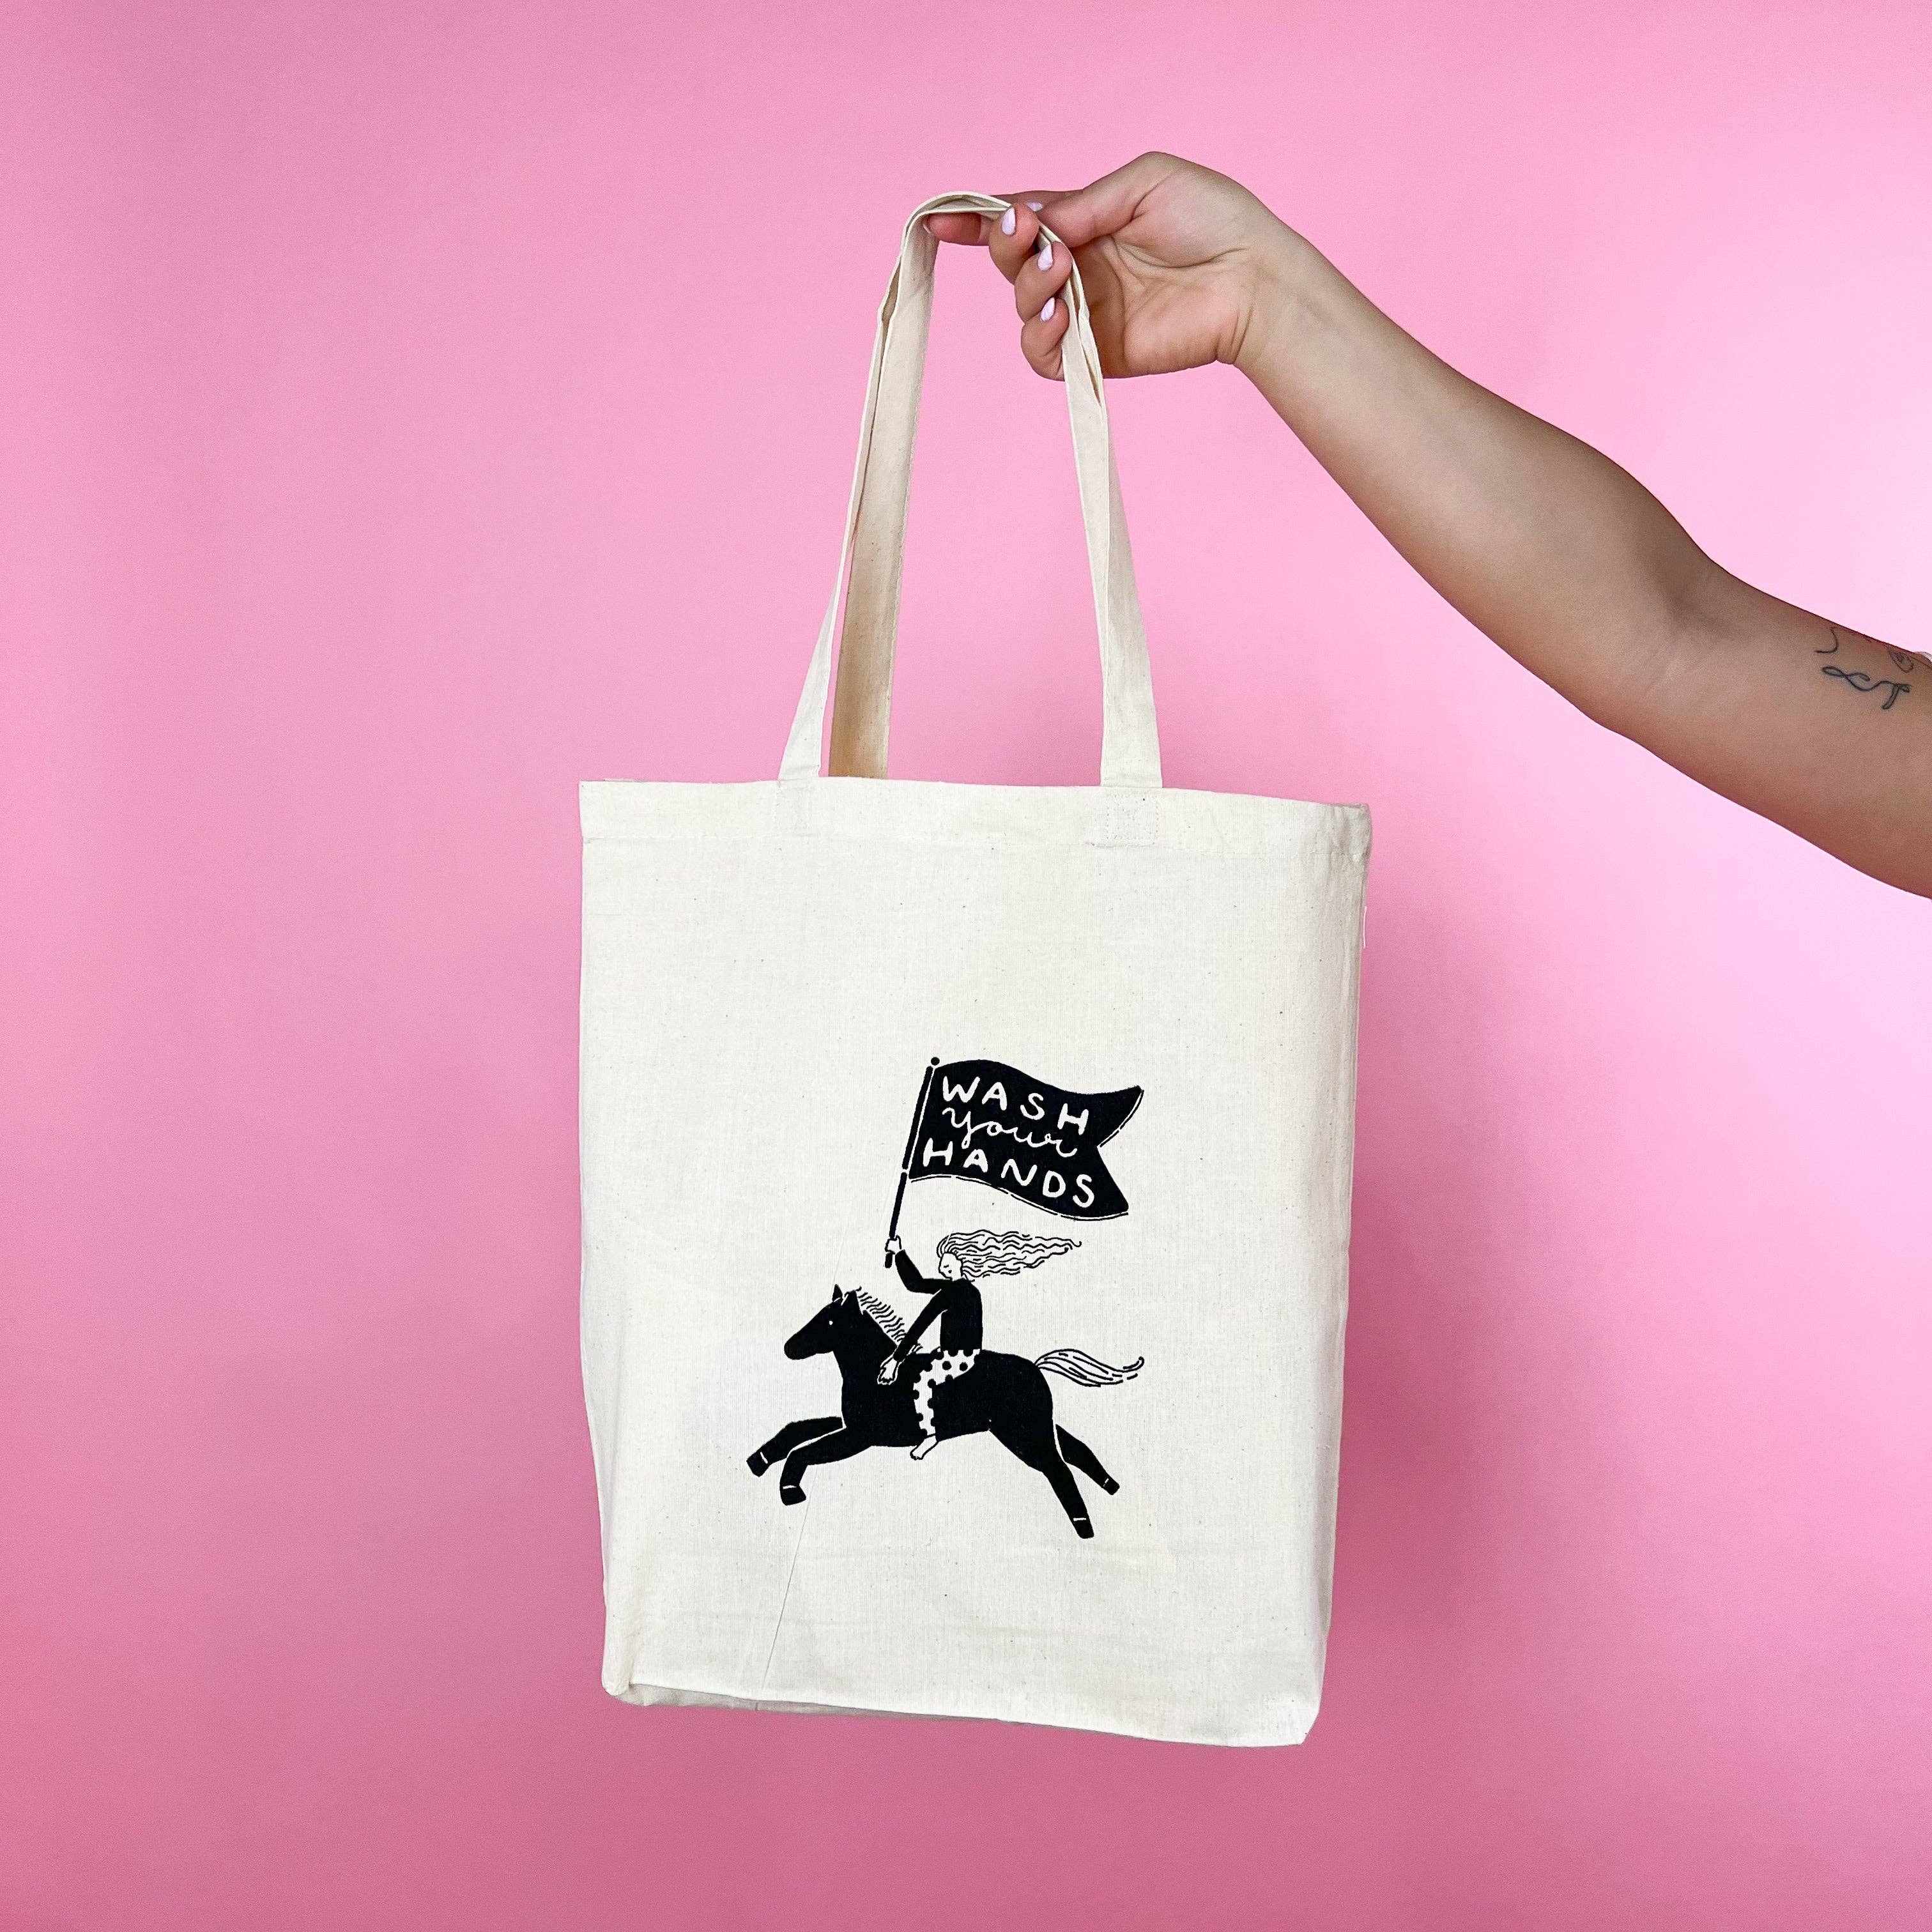 Wash Your Hands Tote Bag – Gasp